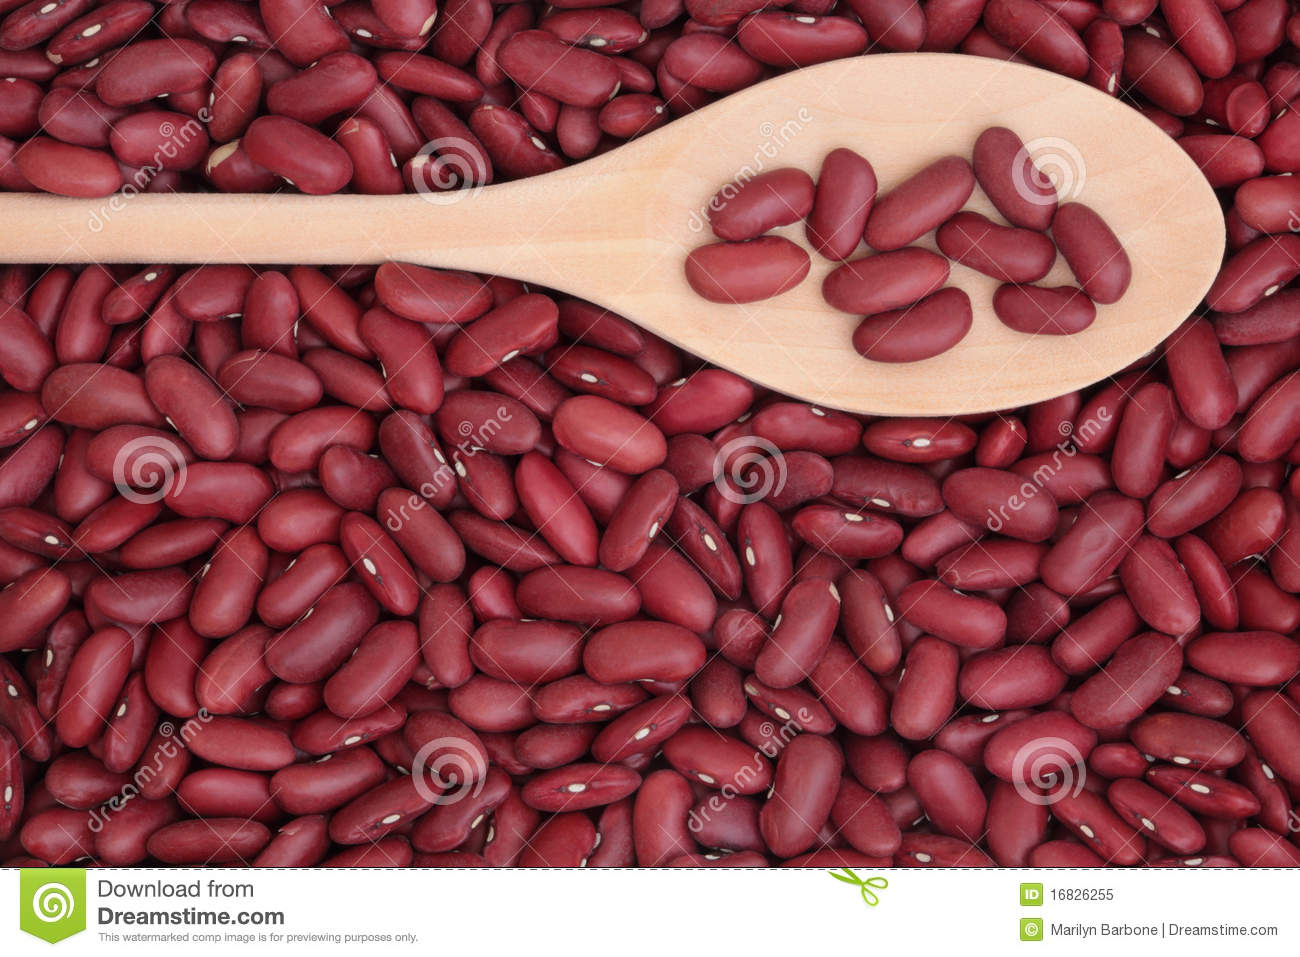 Can Of Beans Clipart Displaying 19 Images For Can Of Beans Clipart